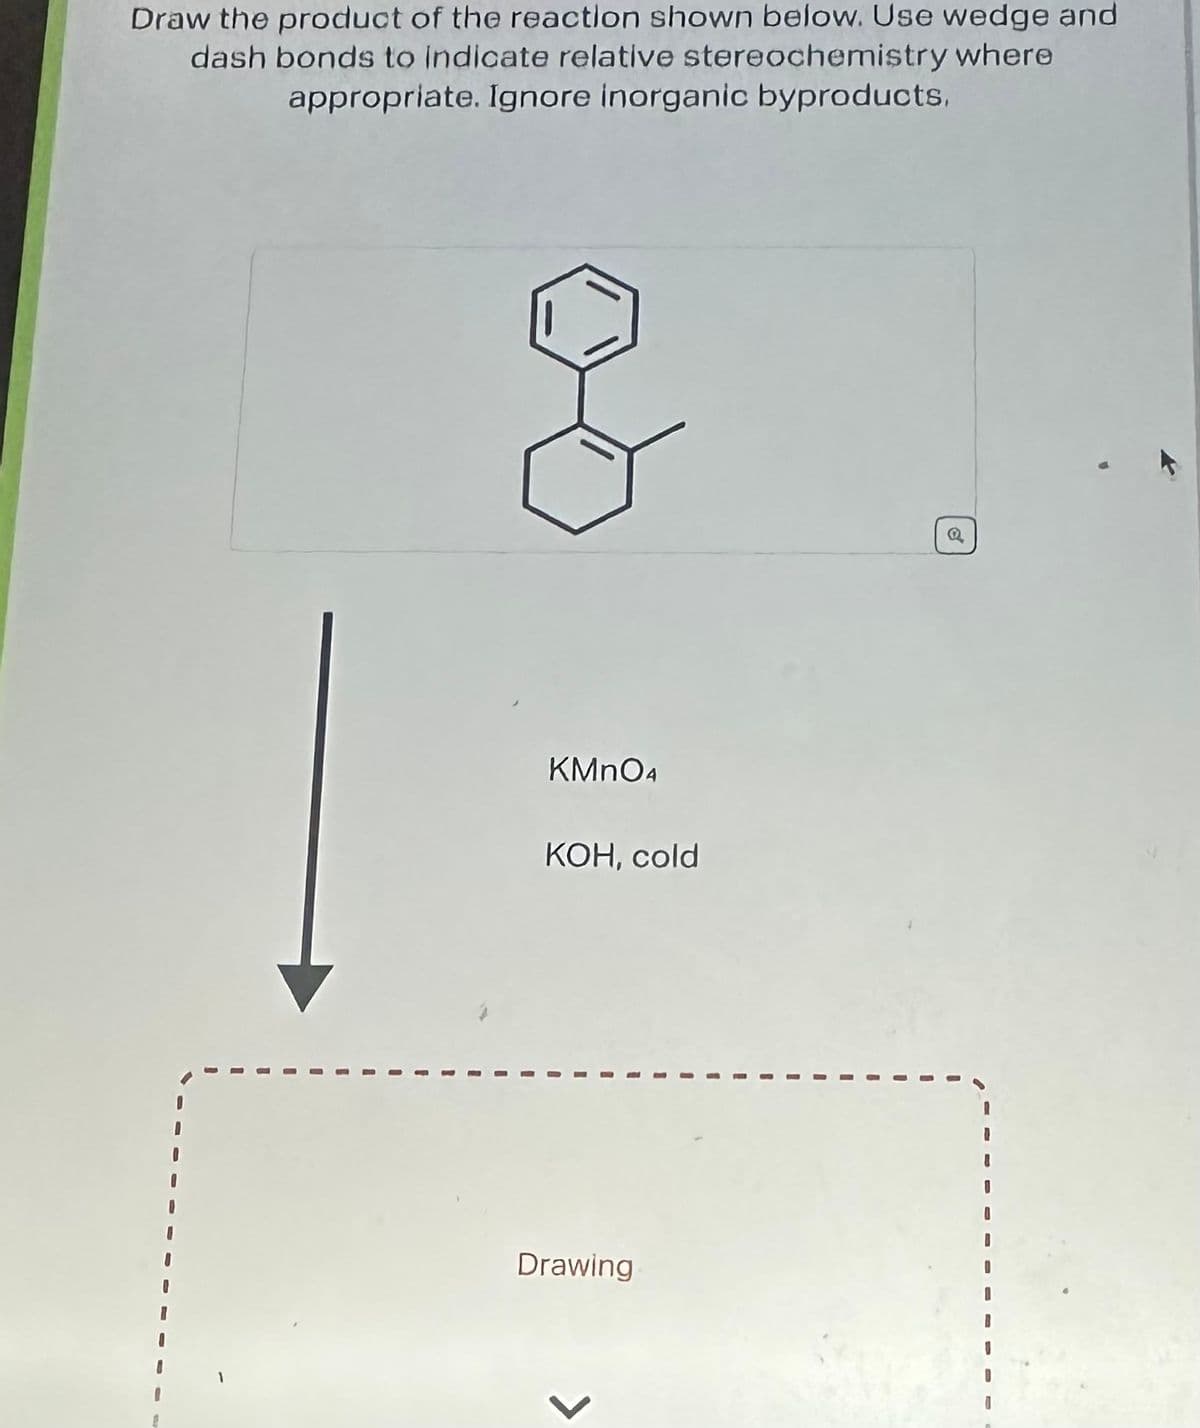 Draw the product of the reaction shown below. Use wedge and
dash bonds to indicate relative stereochemistry where
appropriate. Ignore inorganic byproducts.
G
KMnO4
KOH, cold
Drawing